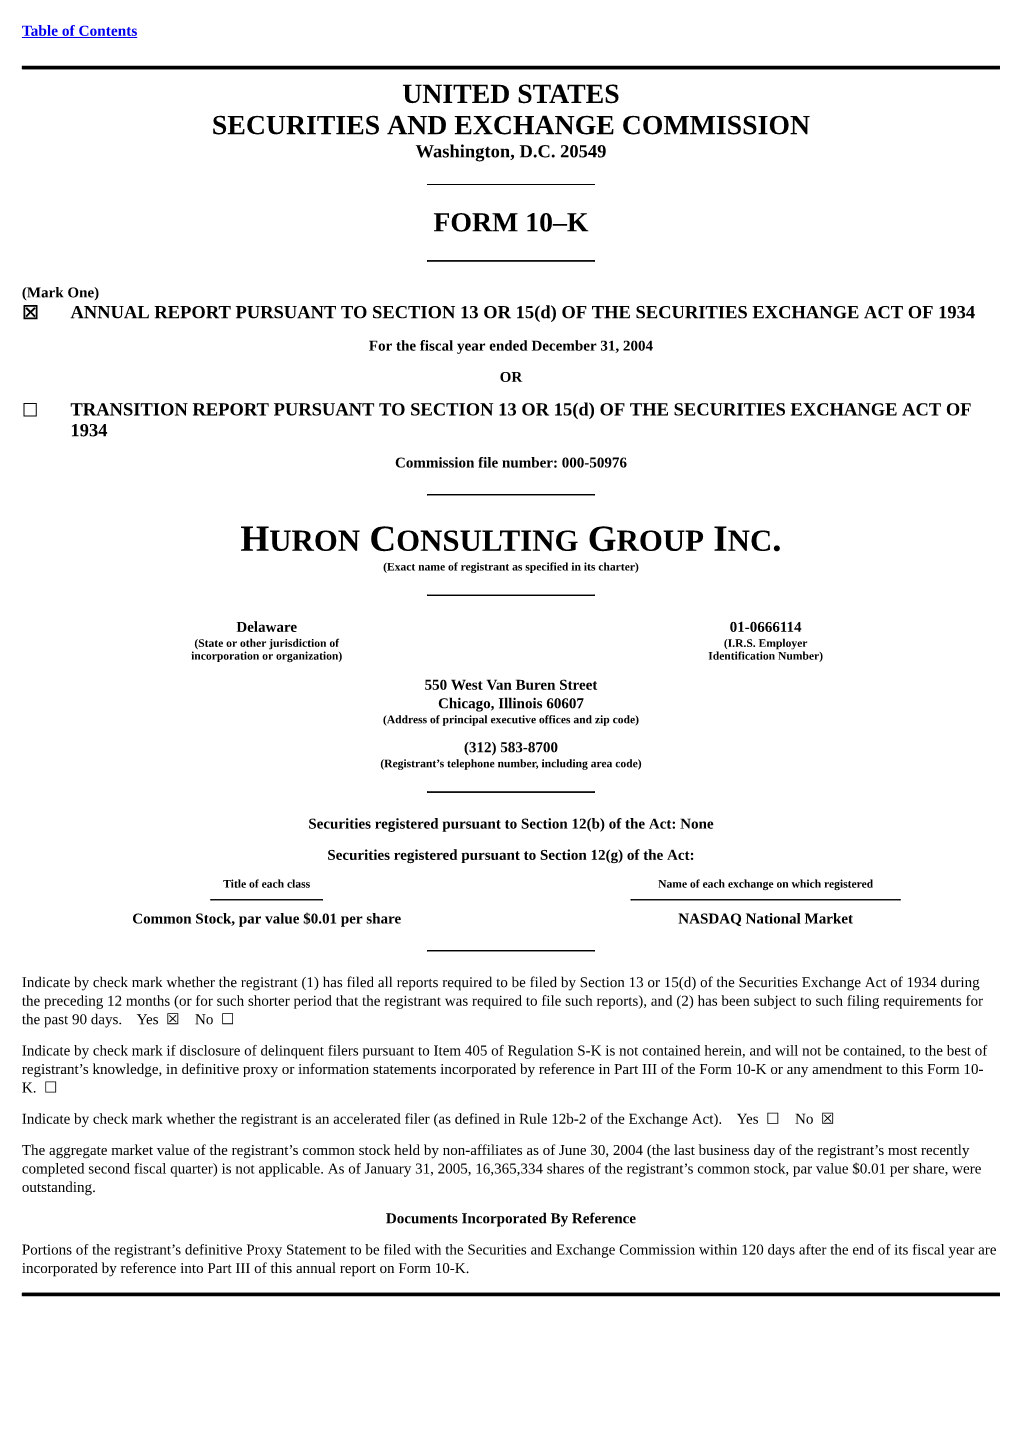 HURON CONSULTING GROUP INC. (Exact Name of Registrant As Specified in Its Charter)